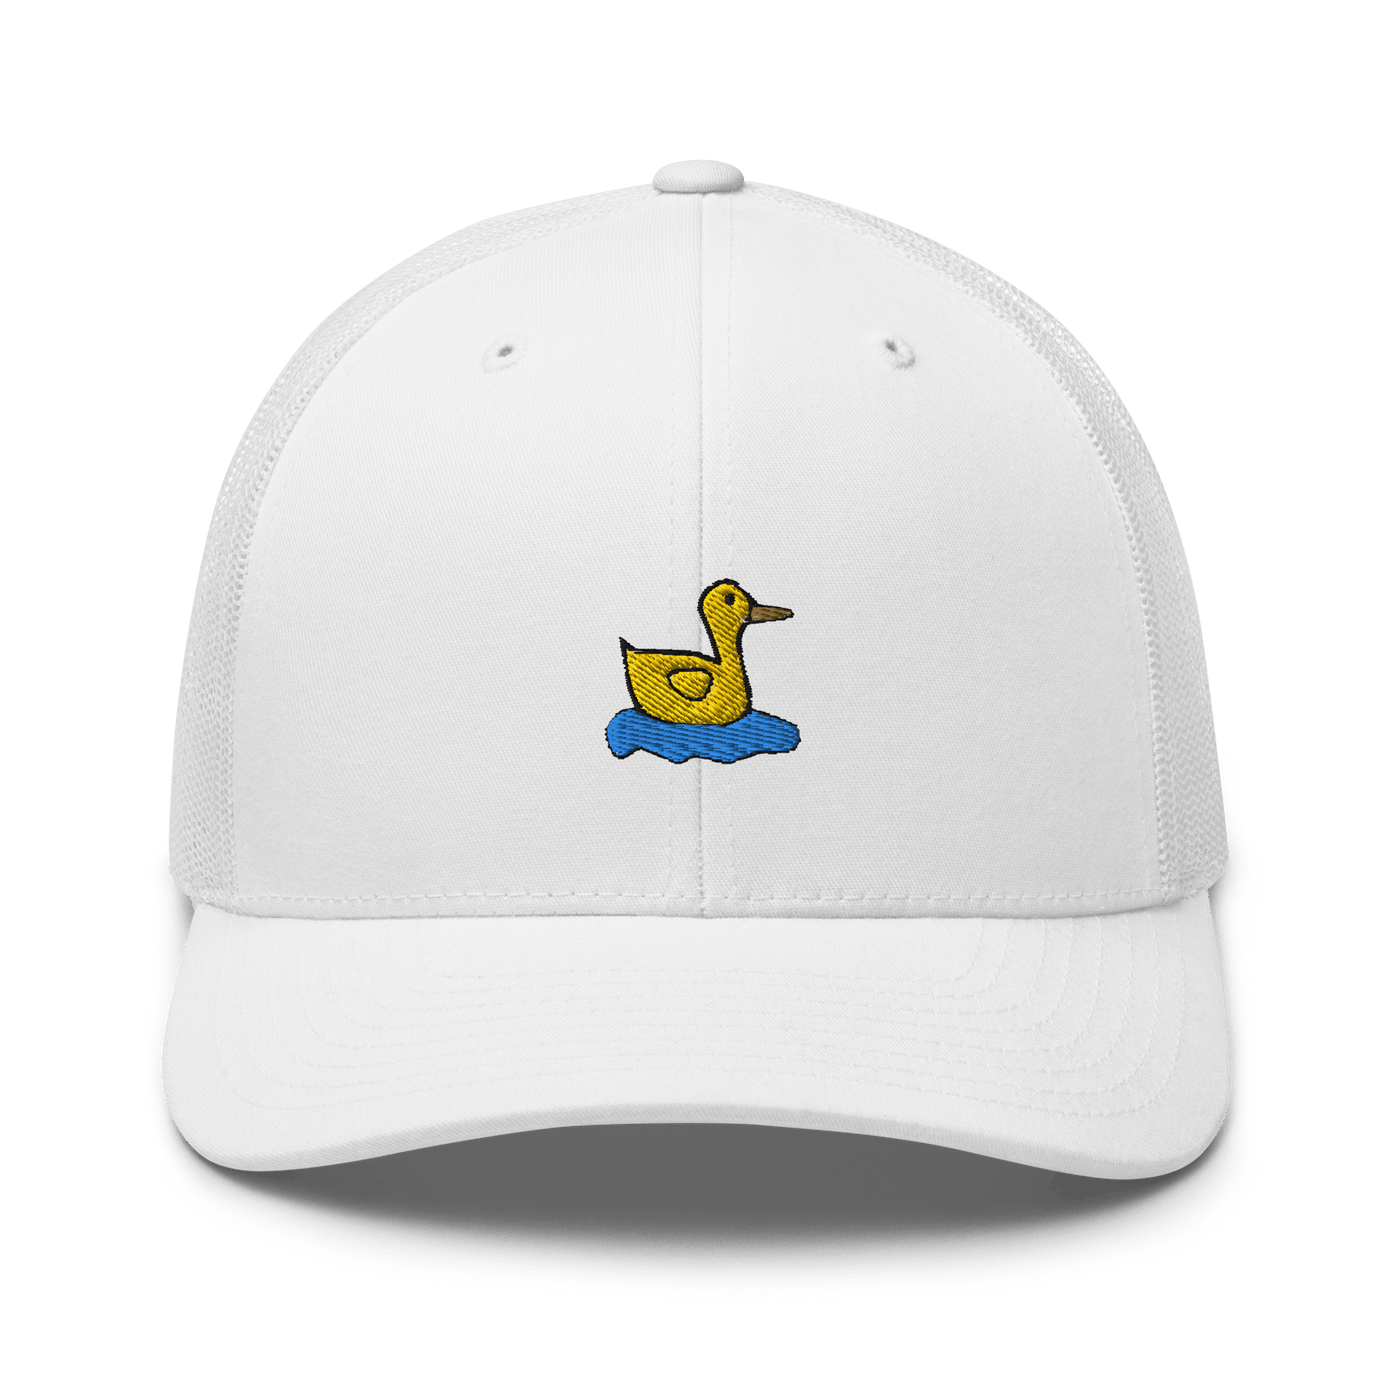 Lonely Duck Trucker Cap - White - - Just Another Cap Store